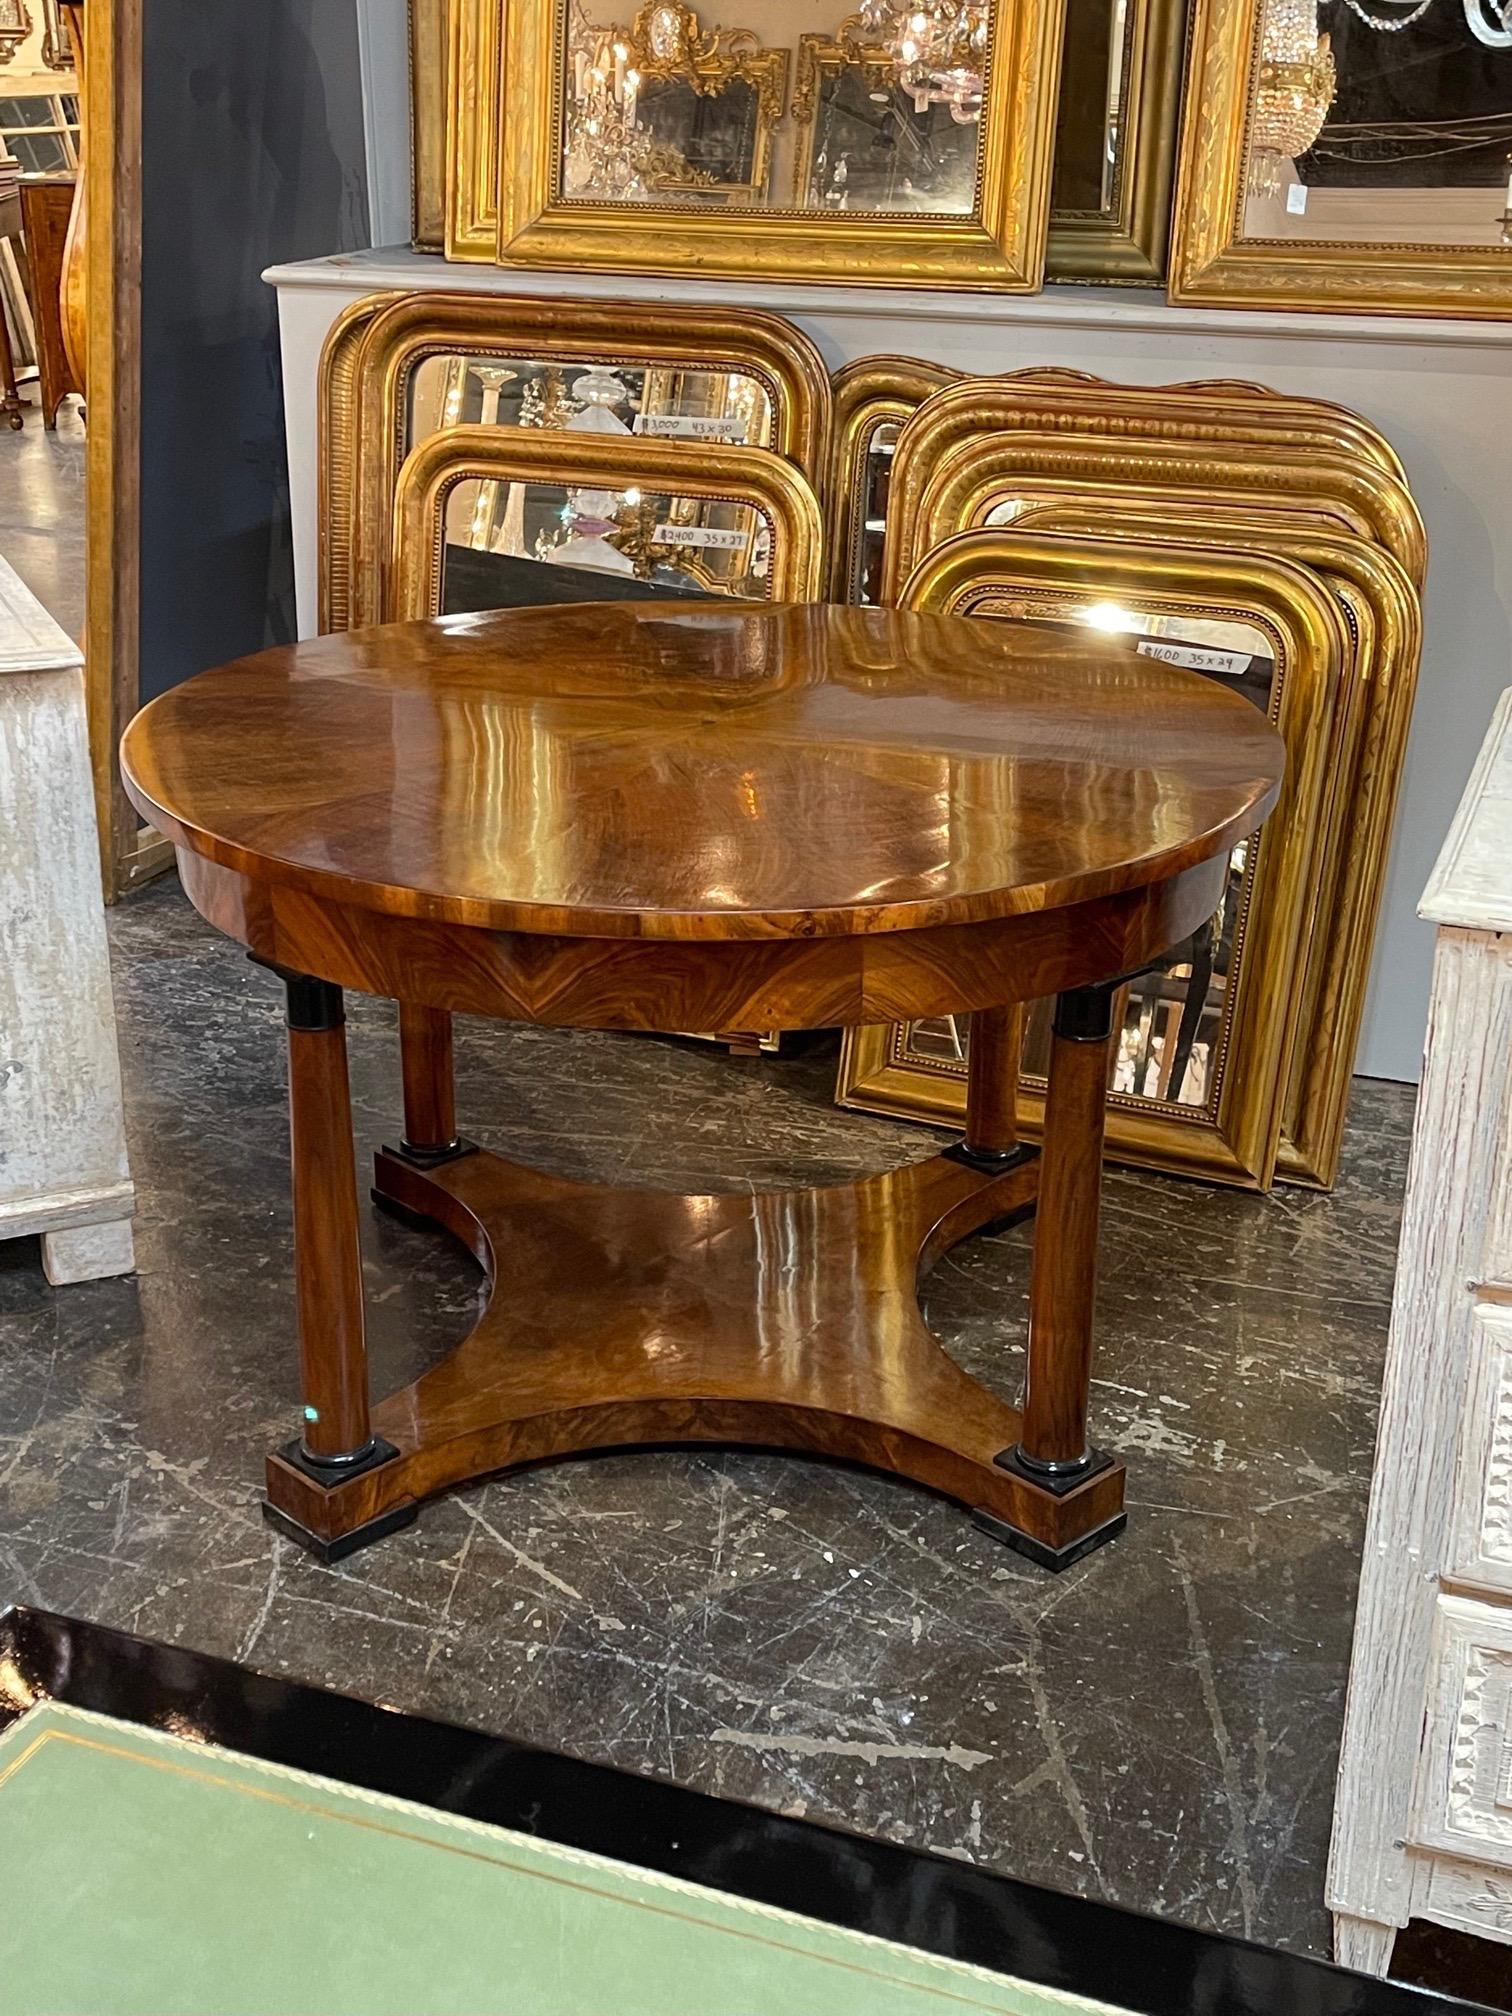 Very fine 19th century Austrian Biedermeier Empire style walnut center table with ebonized details. Gorgeous finish on this piece and a subtle pattern on the top. An exceptional table!!